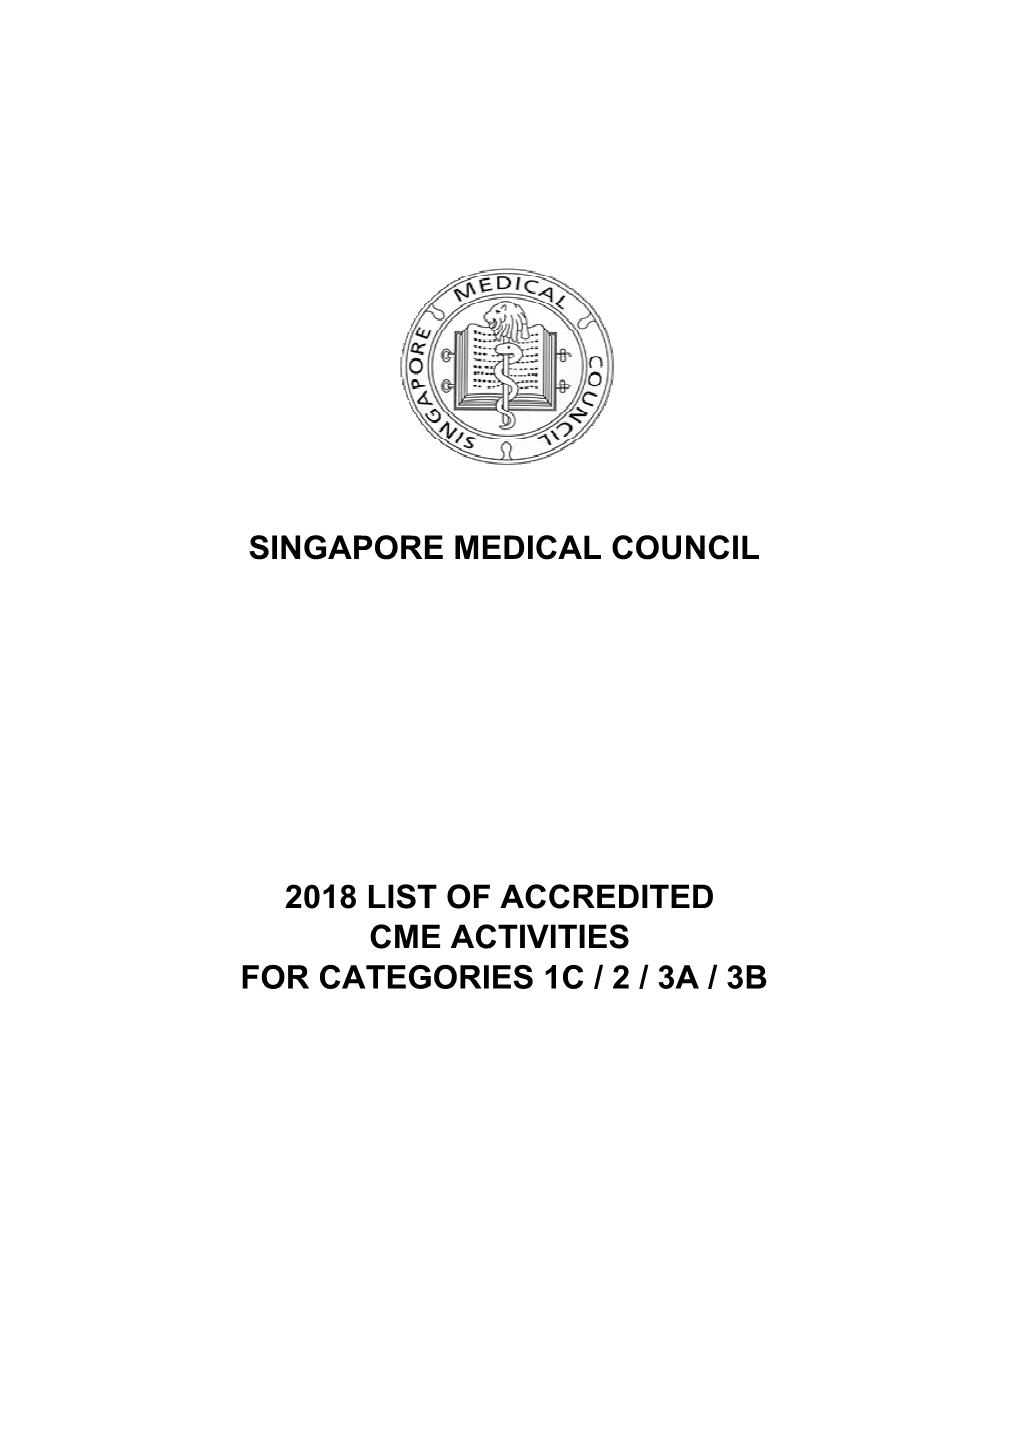 Singapore Medical Council 2018 List of Accredited Cme